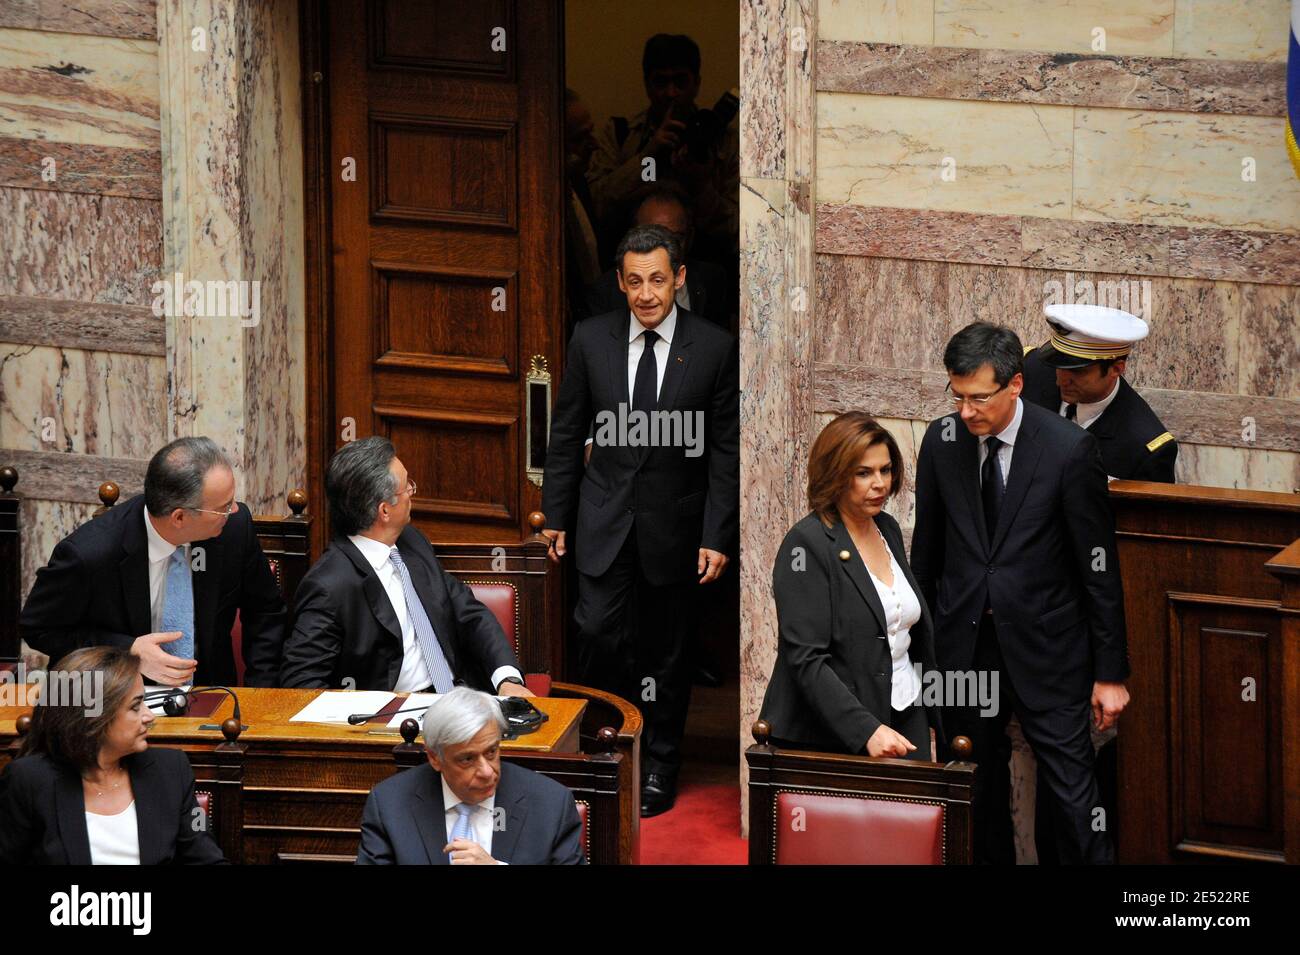 French President Nicolas Sarkozy greets members of the Greek parliament in Athens, Greece on June 6, 2008. Sarkozy arrived in Greece Friday for an official visit, the first by a French head of state in more than 25 years. Sarkozy was addressing the Greek parliament in a ceremony only accorded to three foreign presidents in the past: his predecessor Charles de Gaulle and US presidents Dwight Eisenhower and George Bush Sr. Photo by Mousse/ABACAPRESS.COM Stock Photo